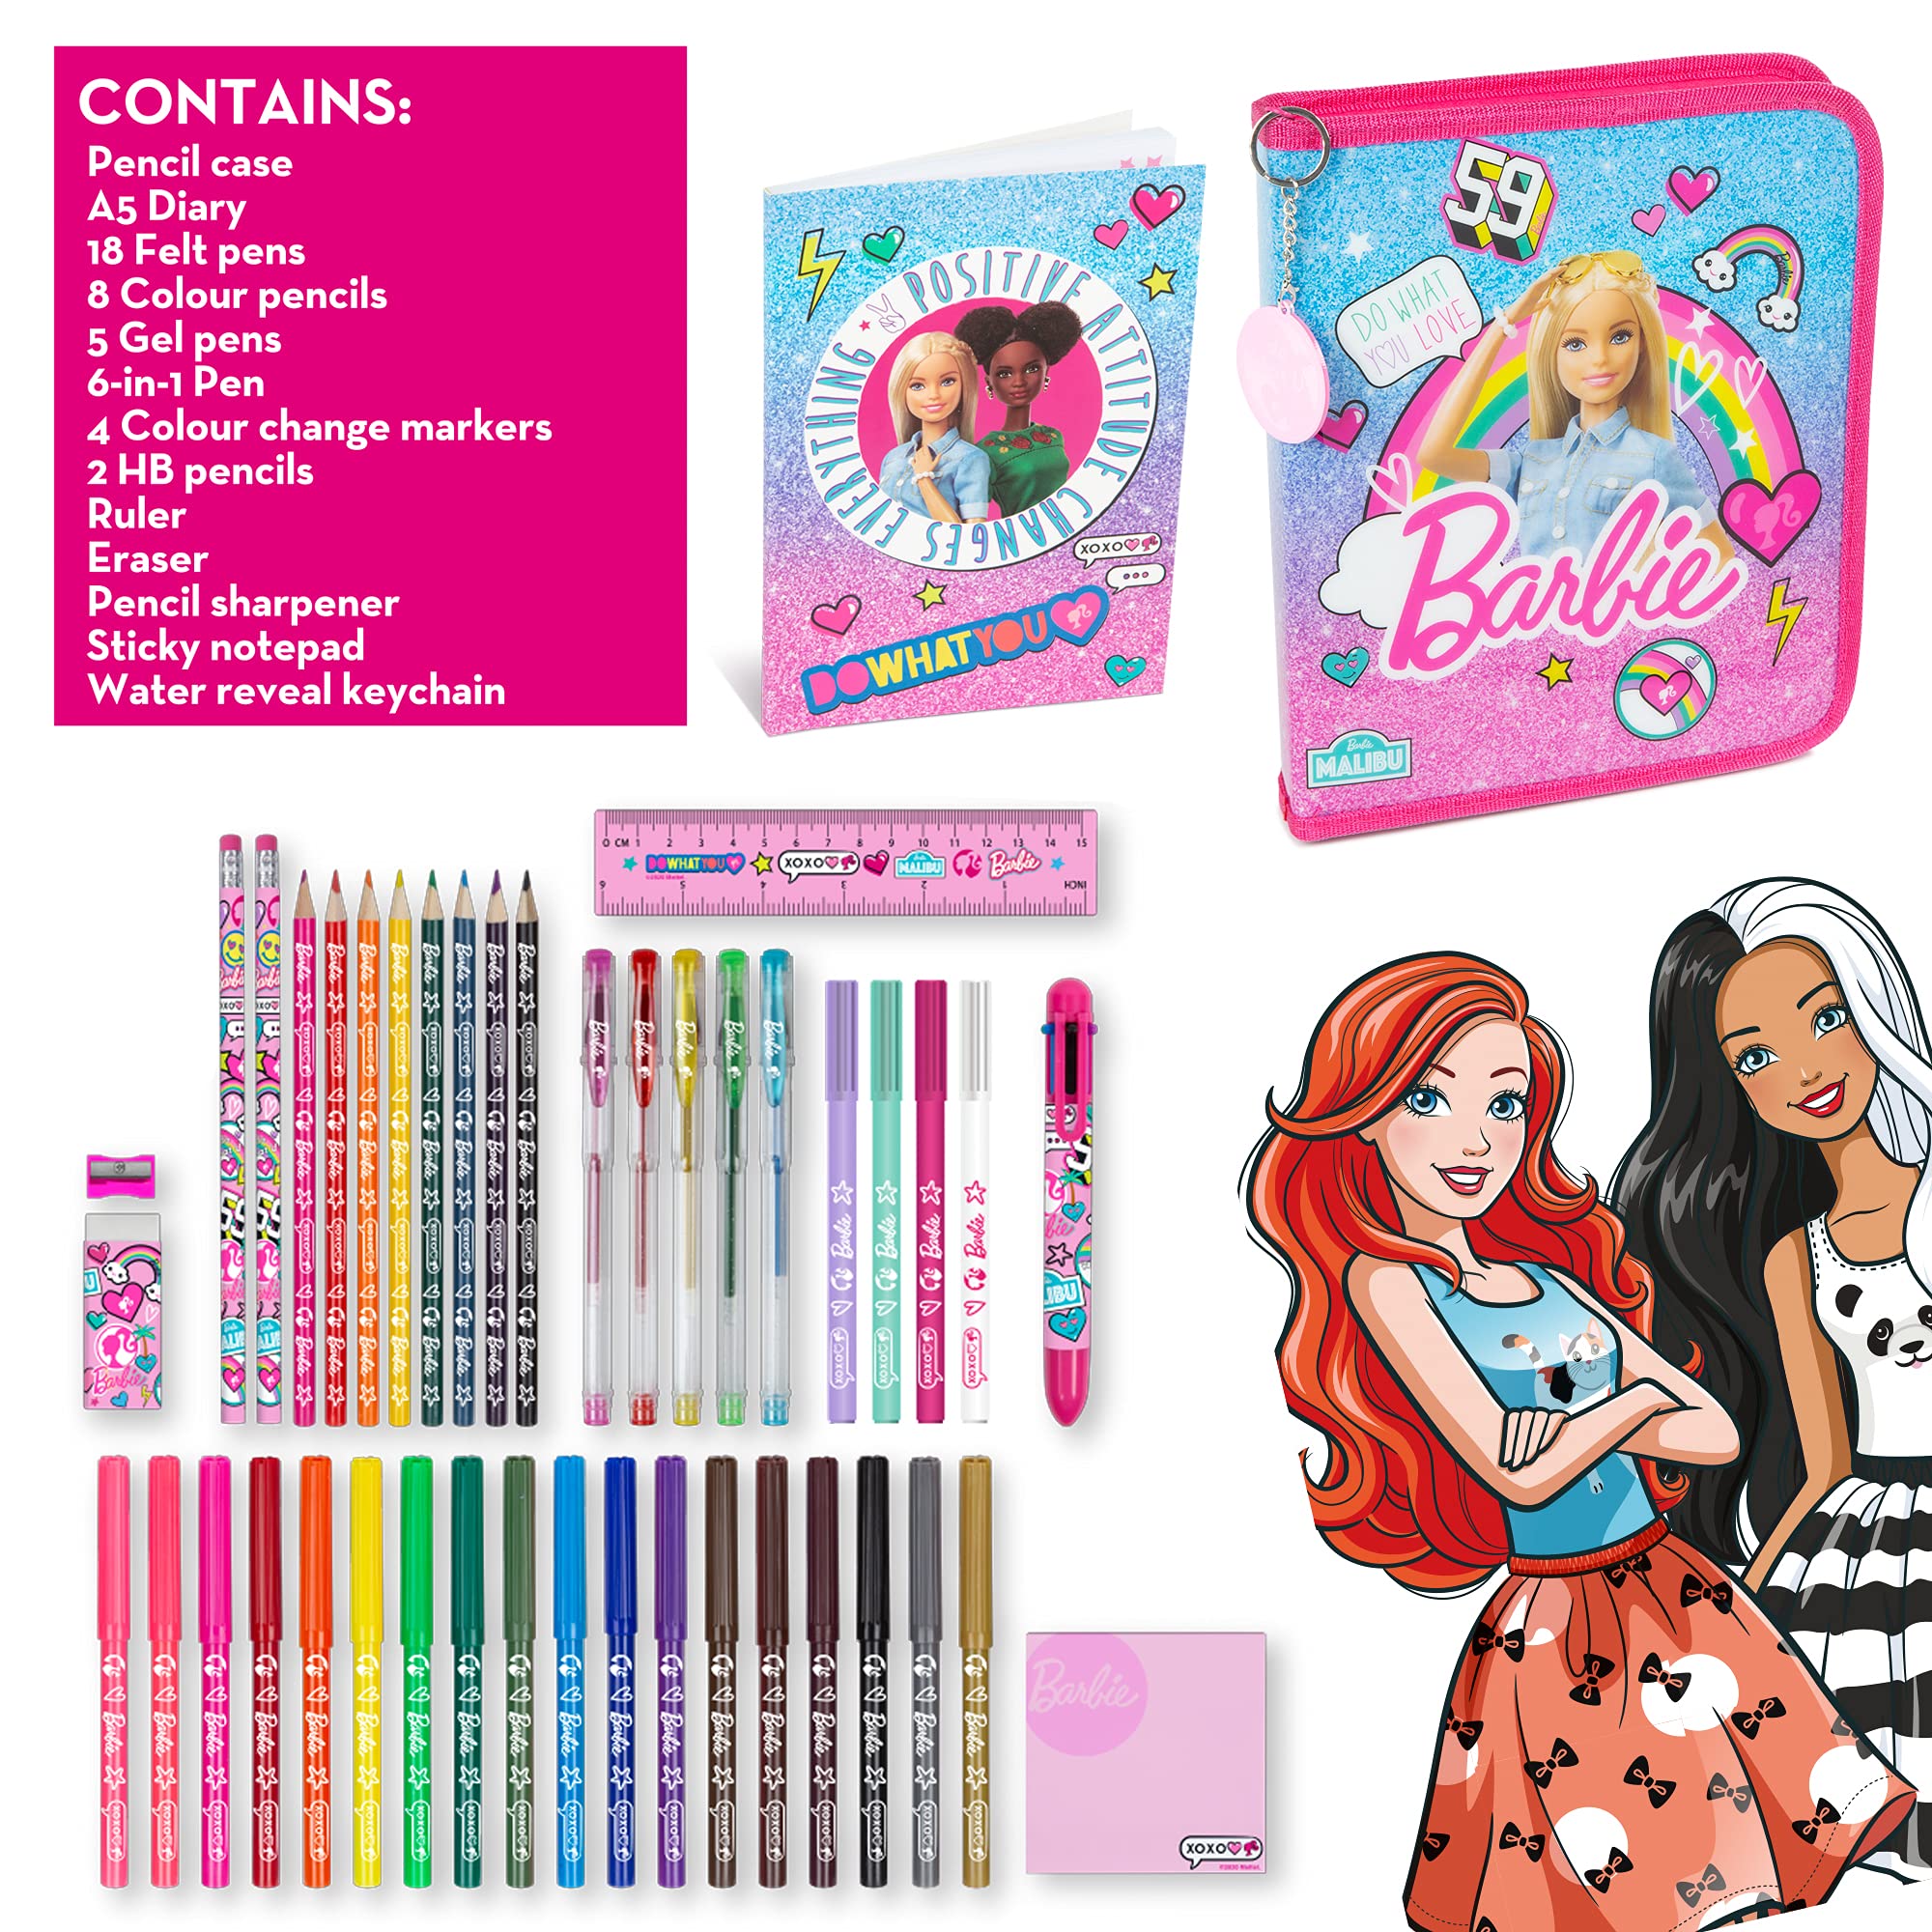 Drawing Barbie #27487 (Cartoons) – Printable coloring pages